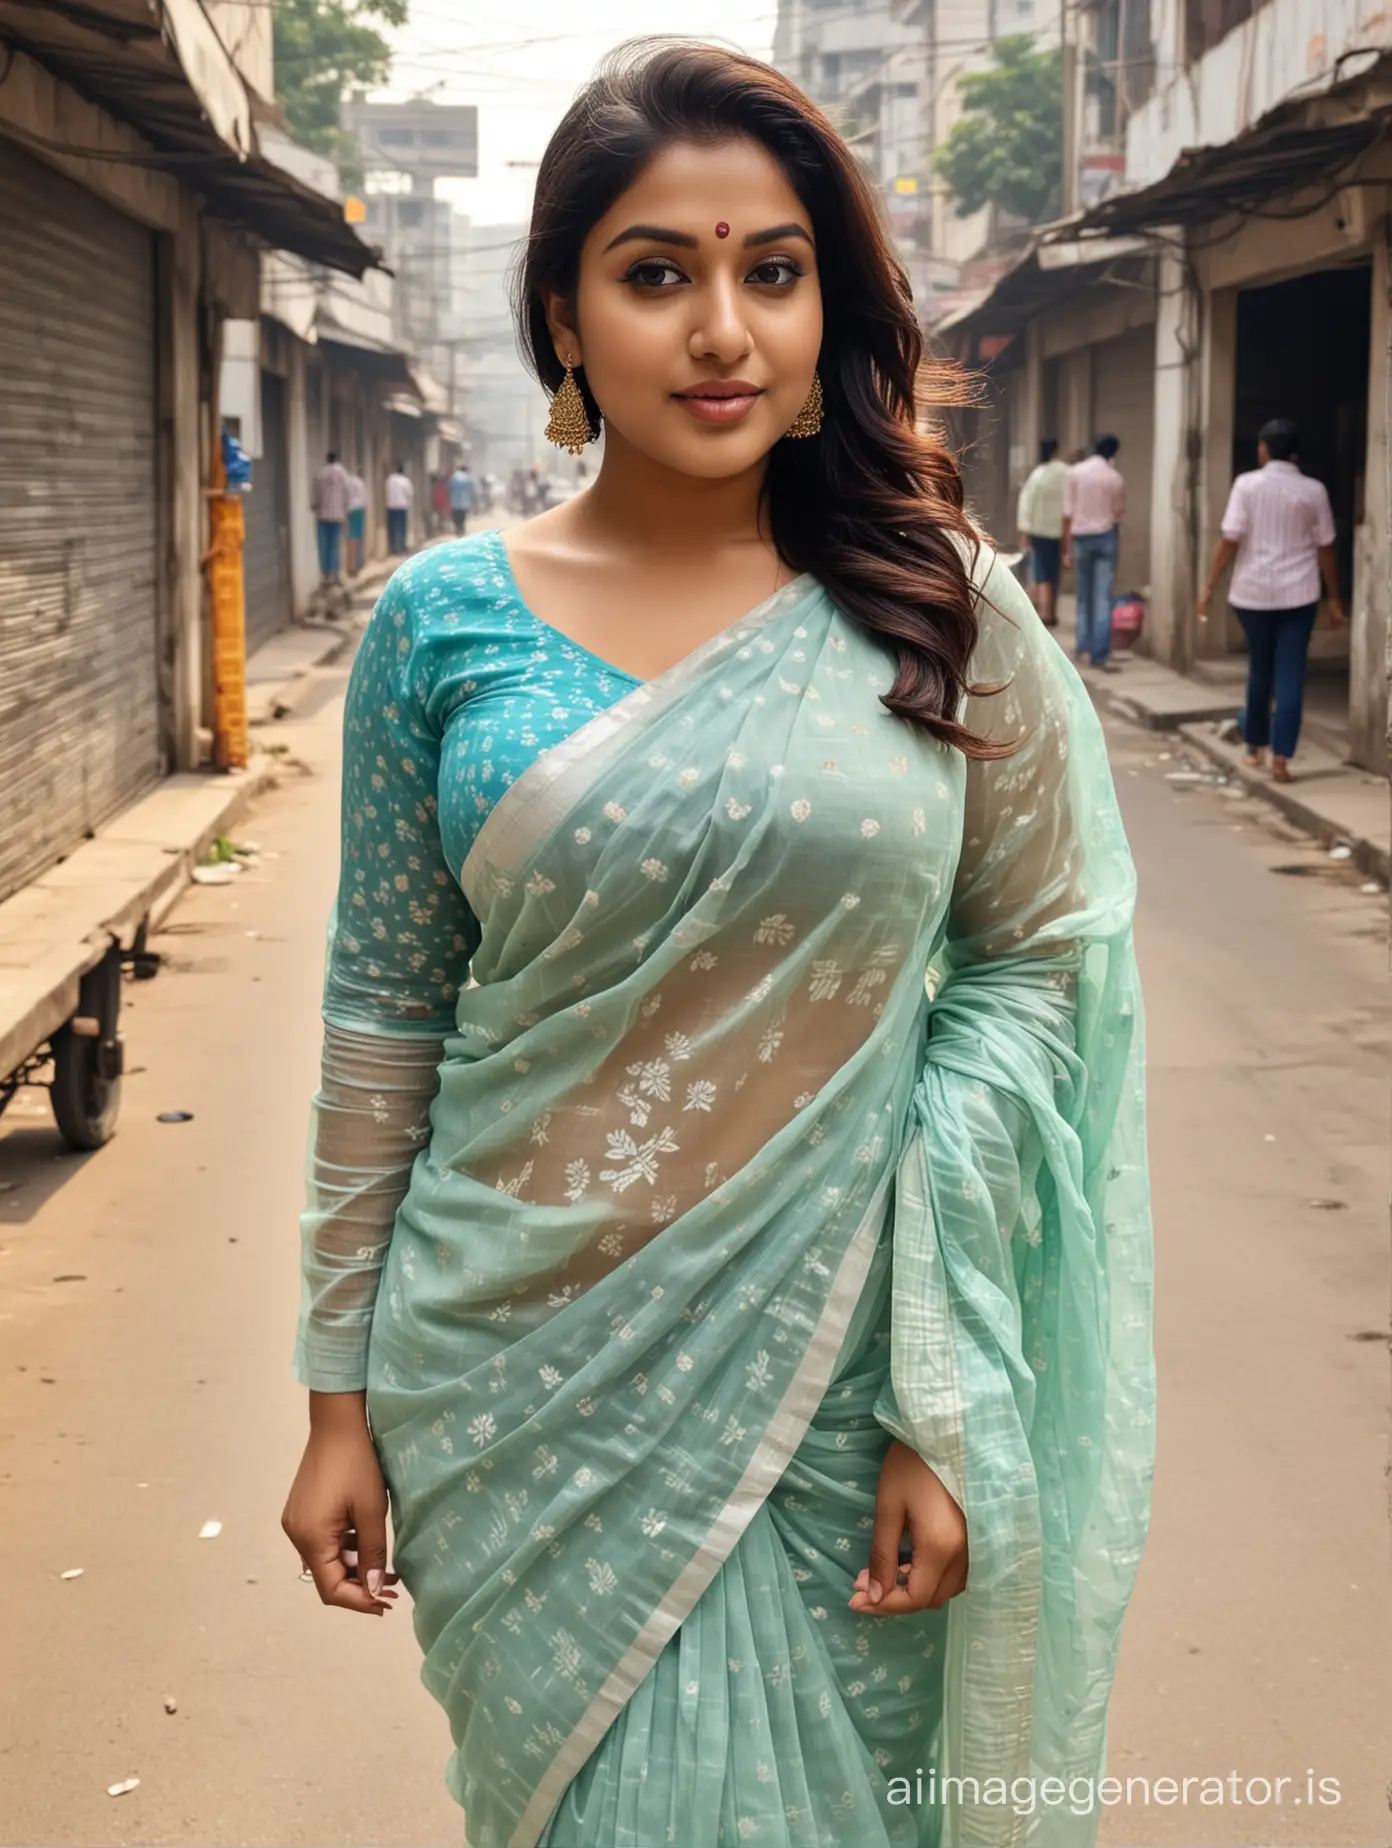 Stylish-Plus-Size-Indian-Women-in-Transparent-Saree-and-Full-Sleeve-Blouse-on-Urban-Street